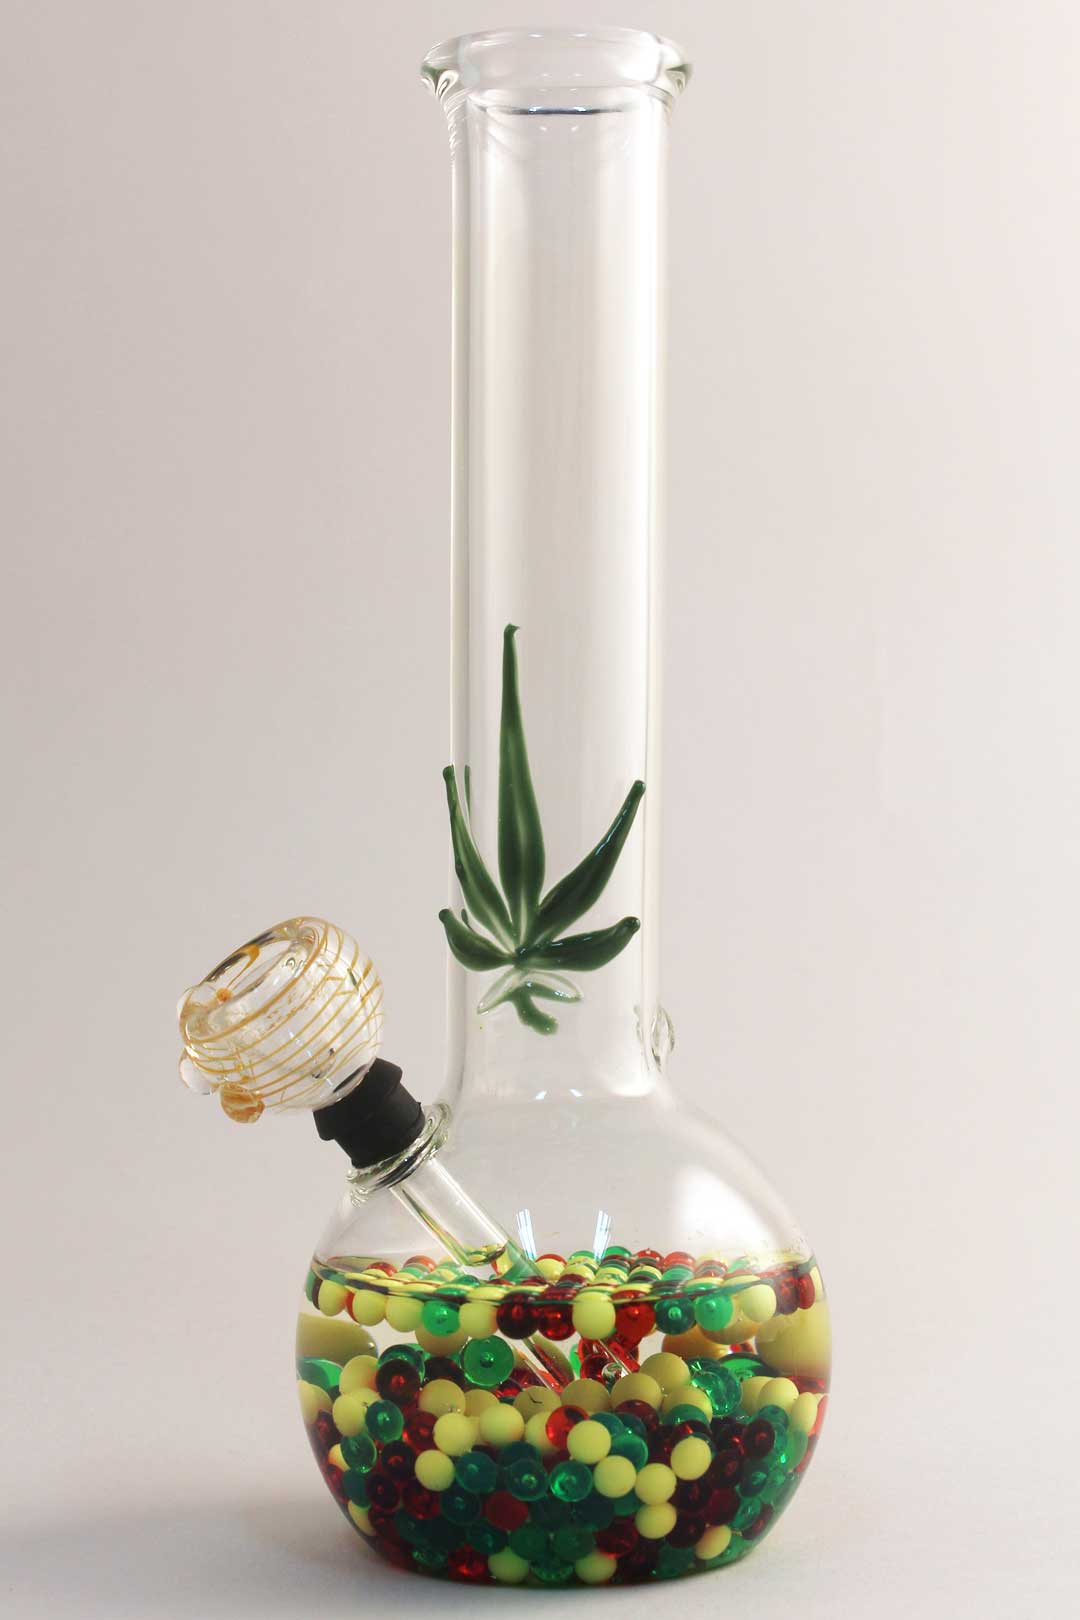 Diffuser beads in the water bong